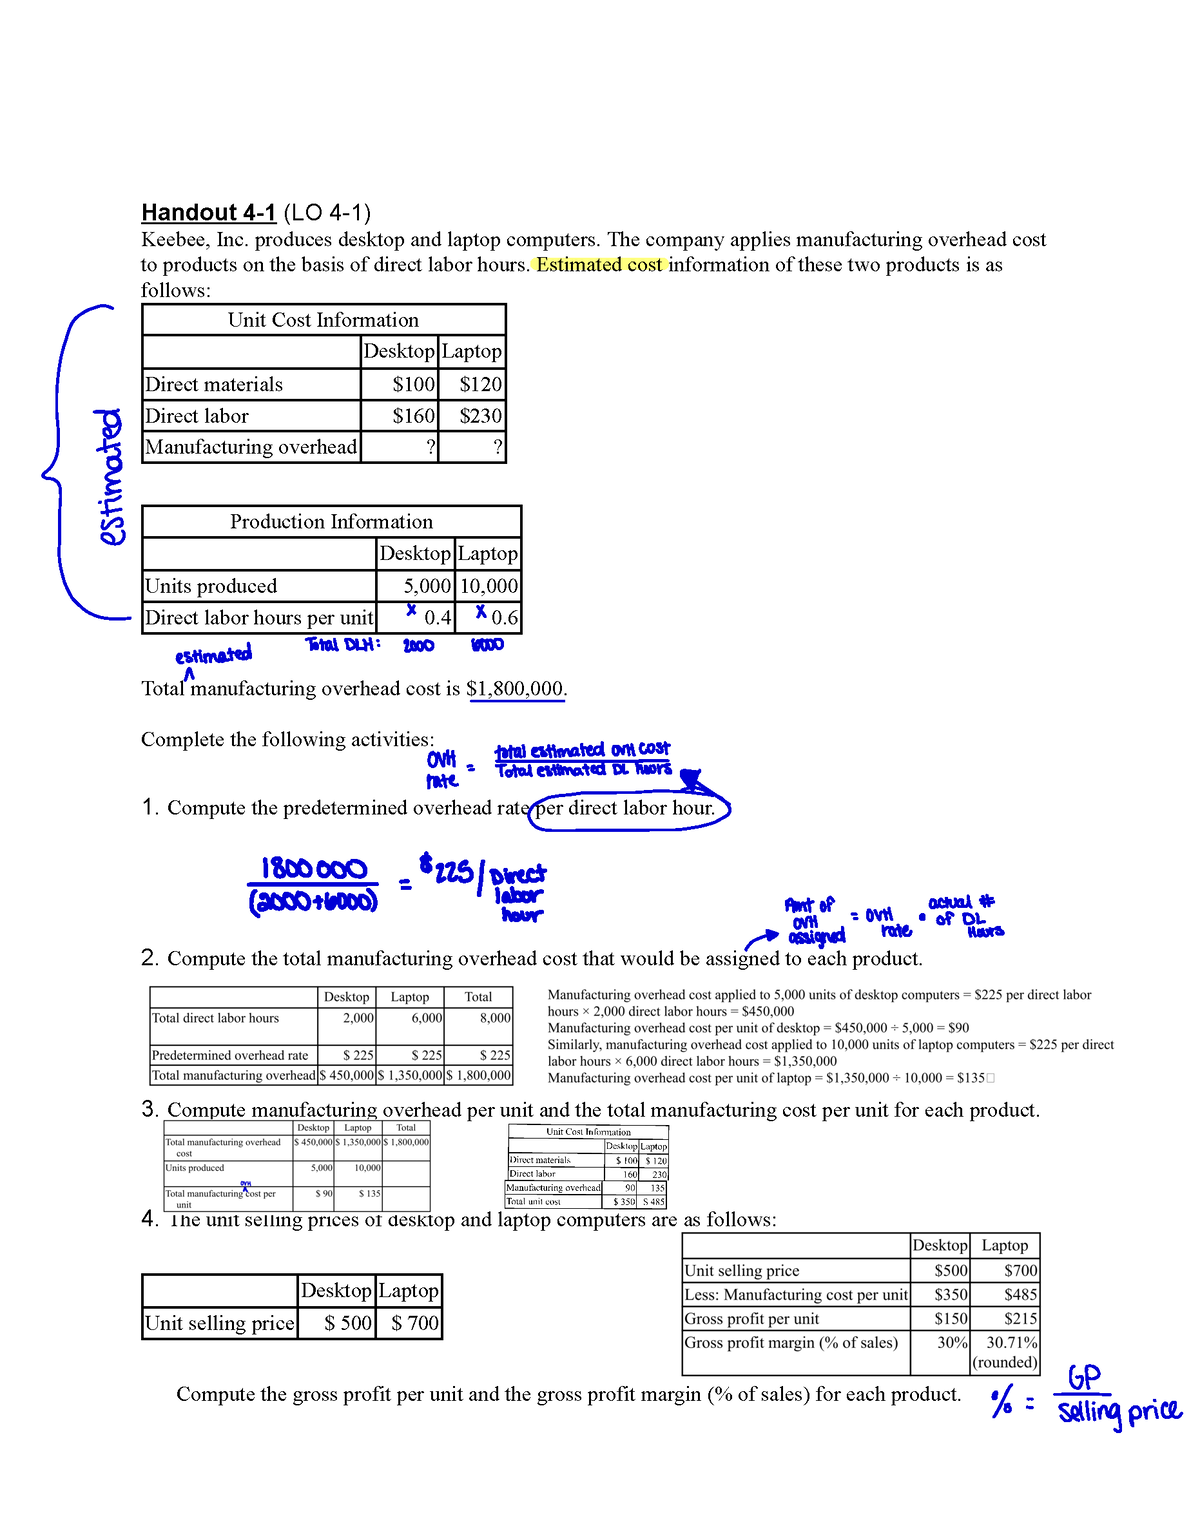 chapter 3 homework accounting mcgraw hill quizlet